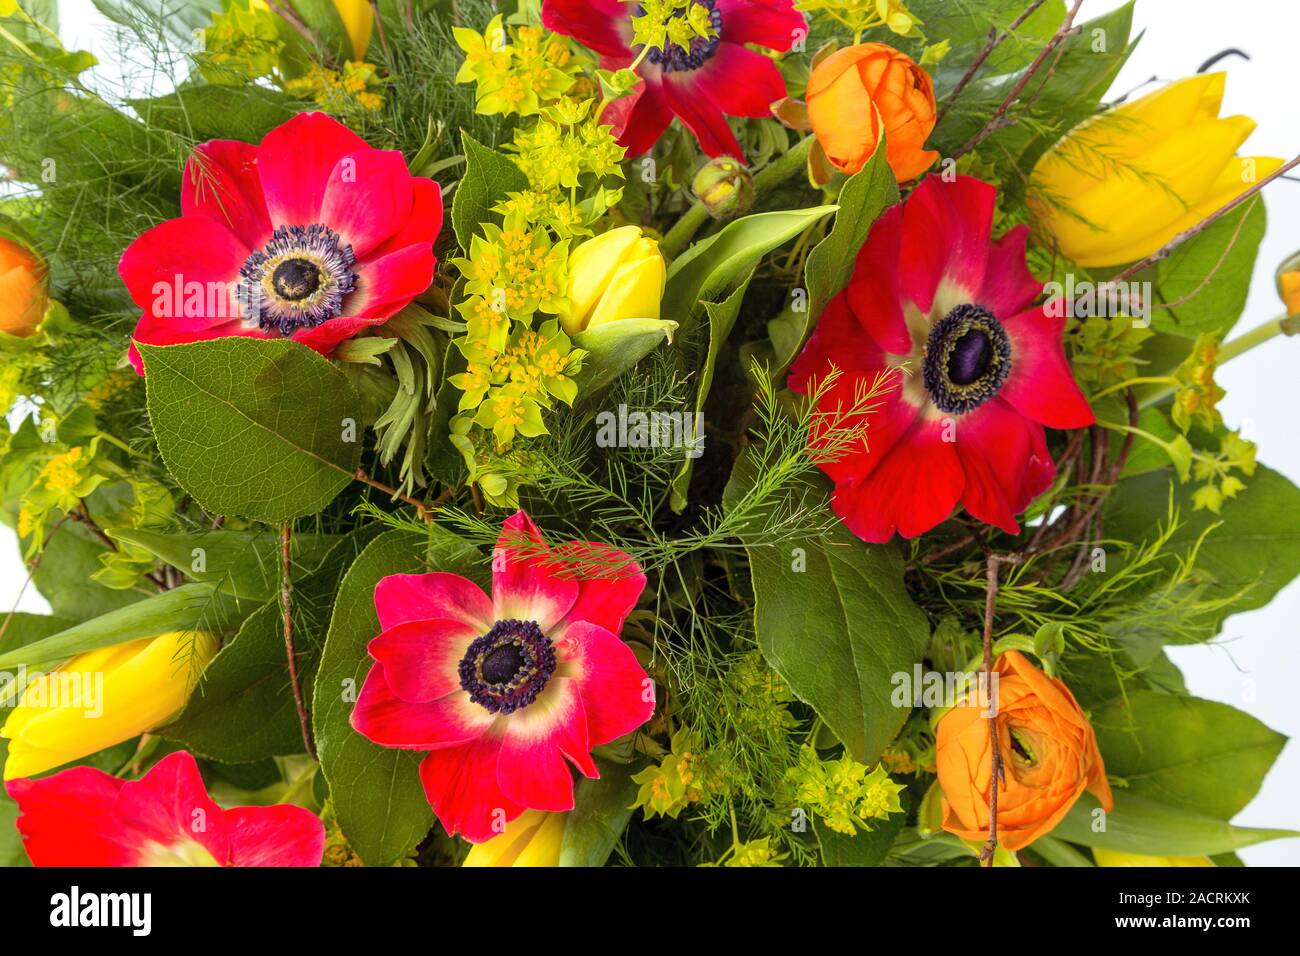 Bouquet with spring flowers Stock Photo